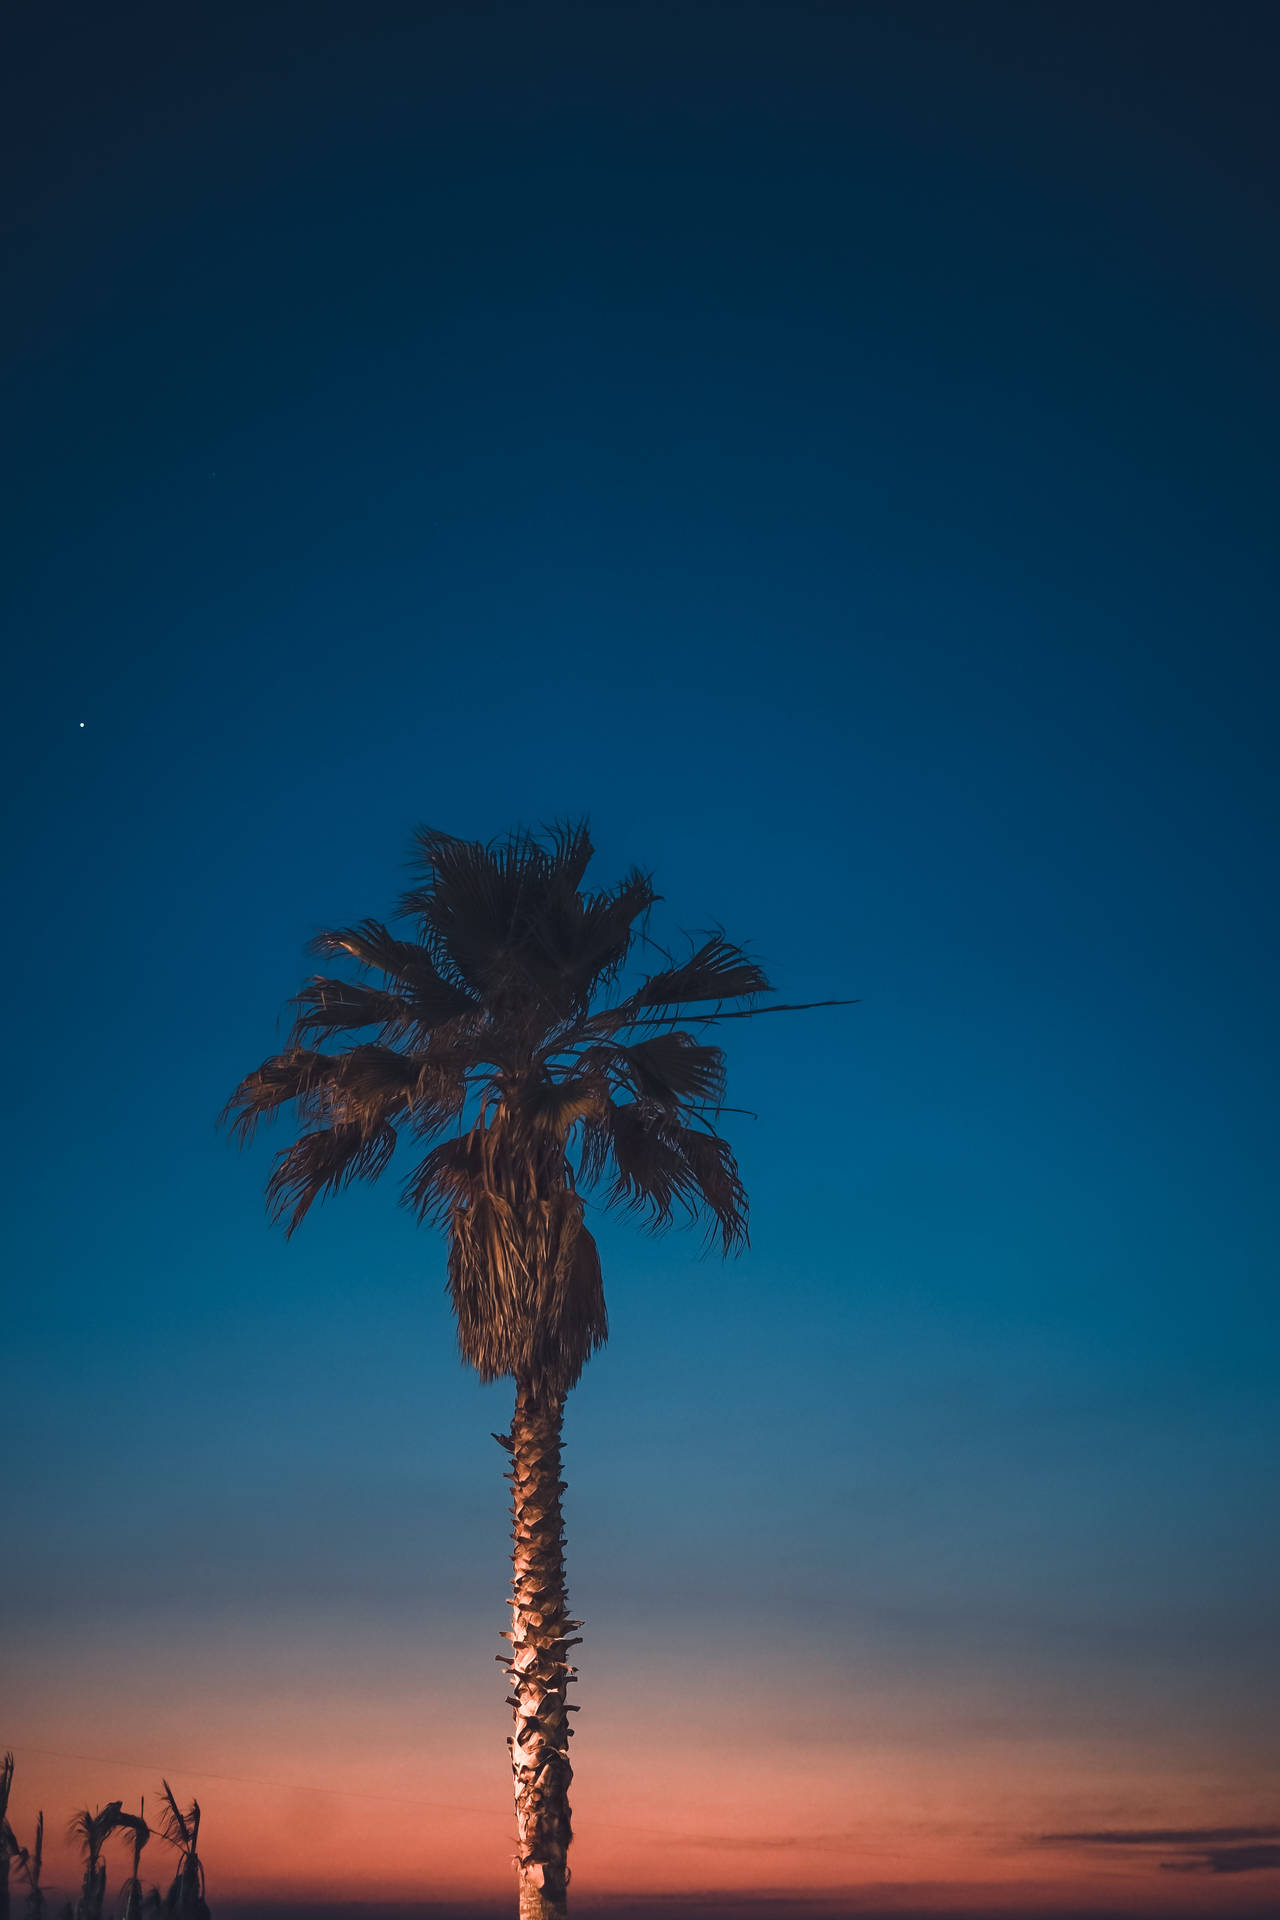 The Beautiful Ombre Sky With A Single Palm Tree Silhouetted Against It Background